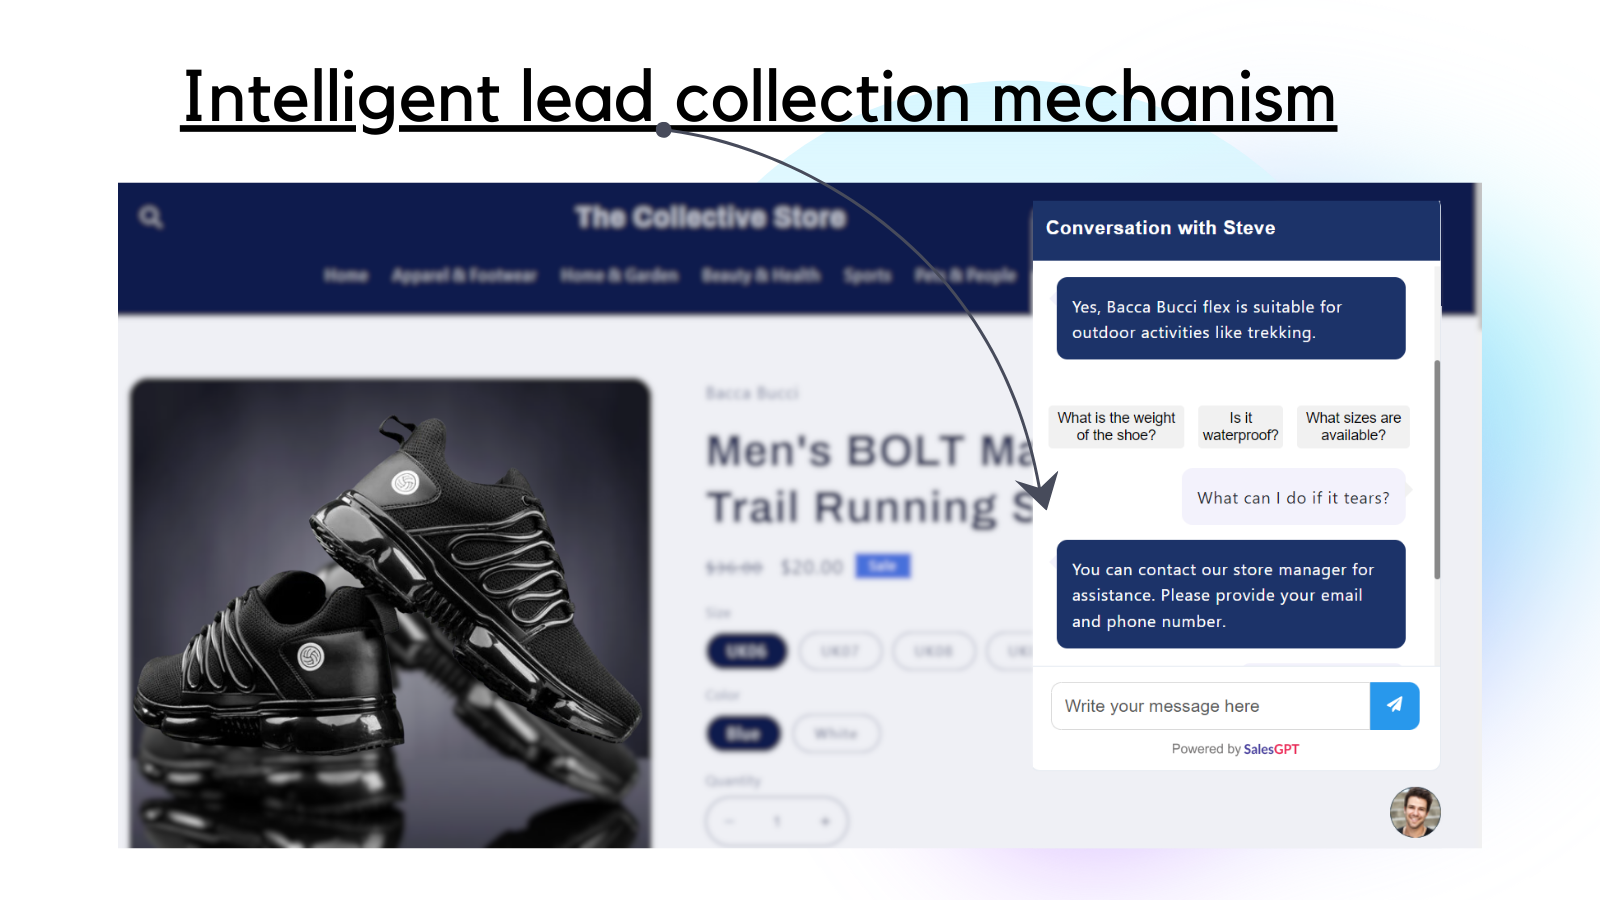 Lead collection when unable to answer